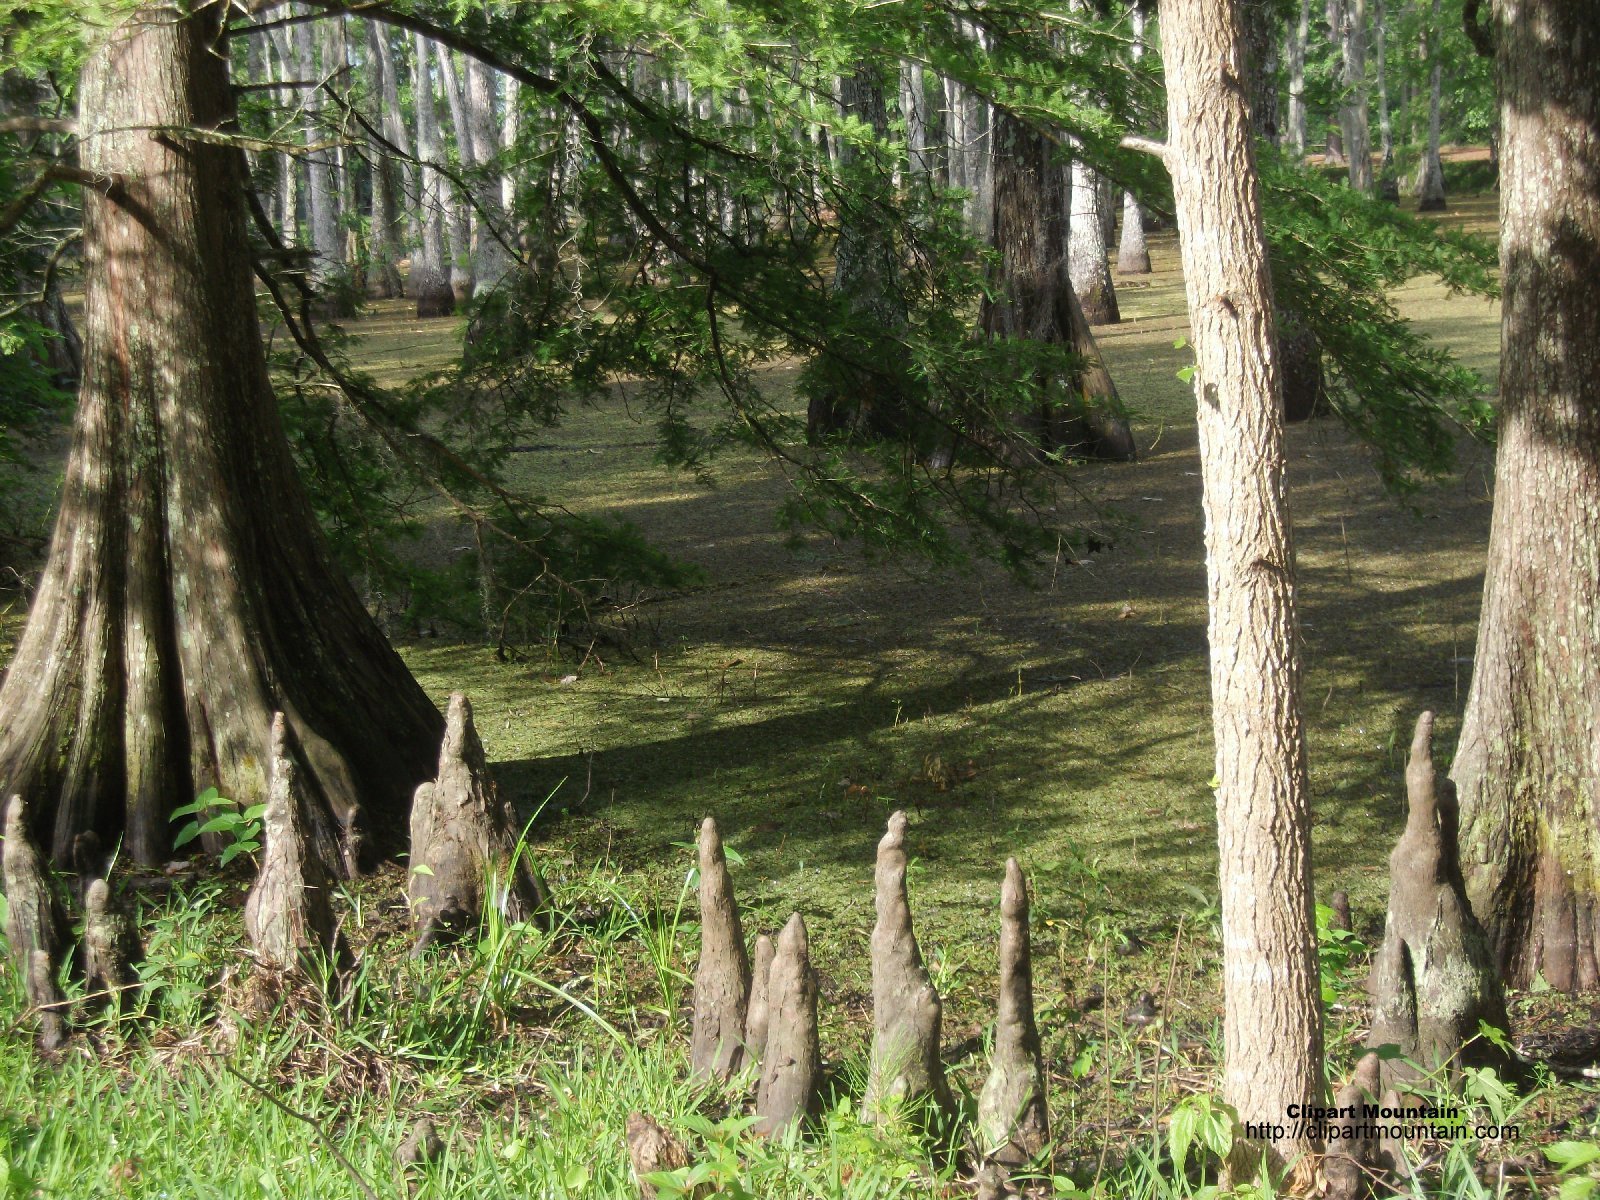 Swamp People Desktop Wallpaper Your laptop and this course